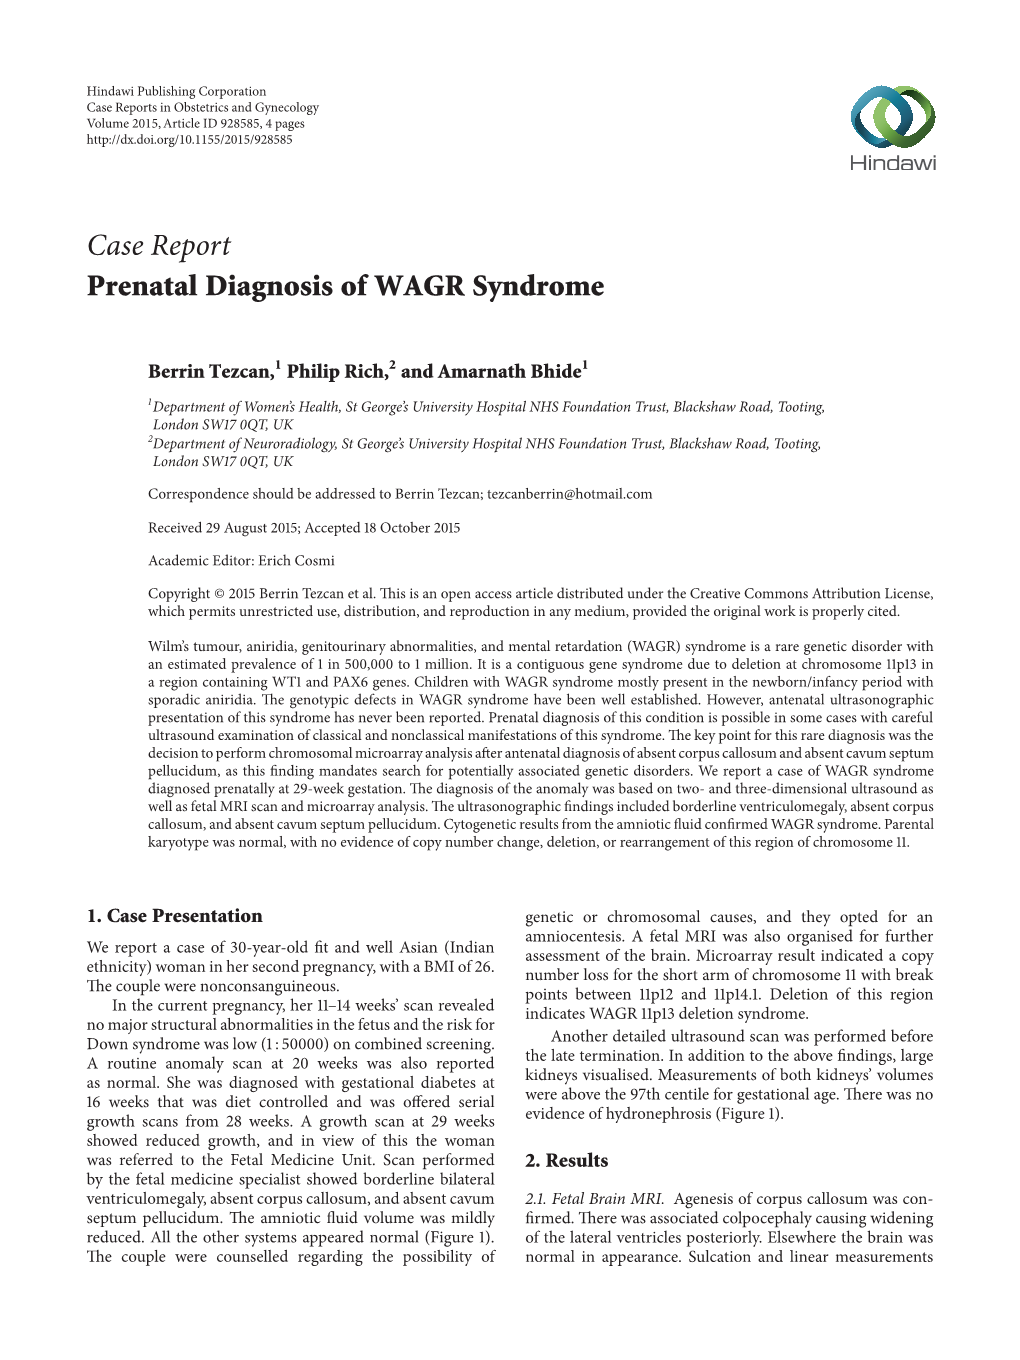 Case Report Prenatal Diagnosis of WAGR Syndrome